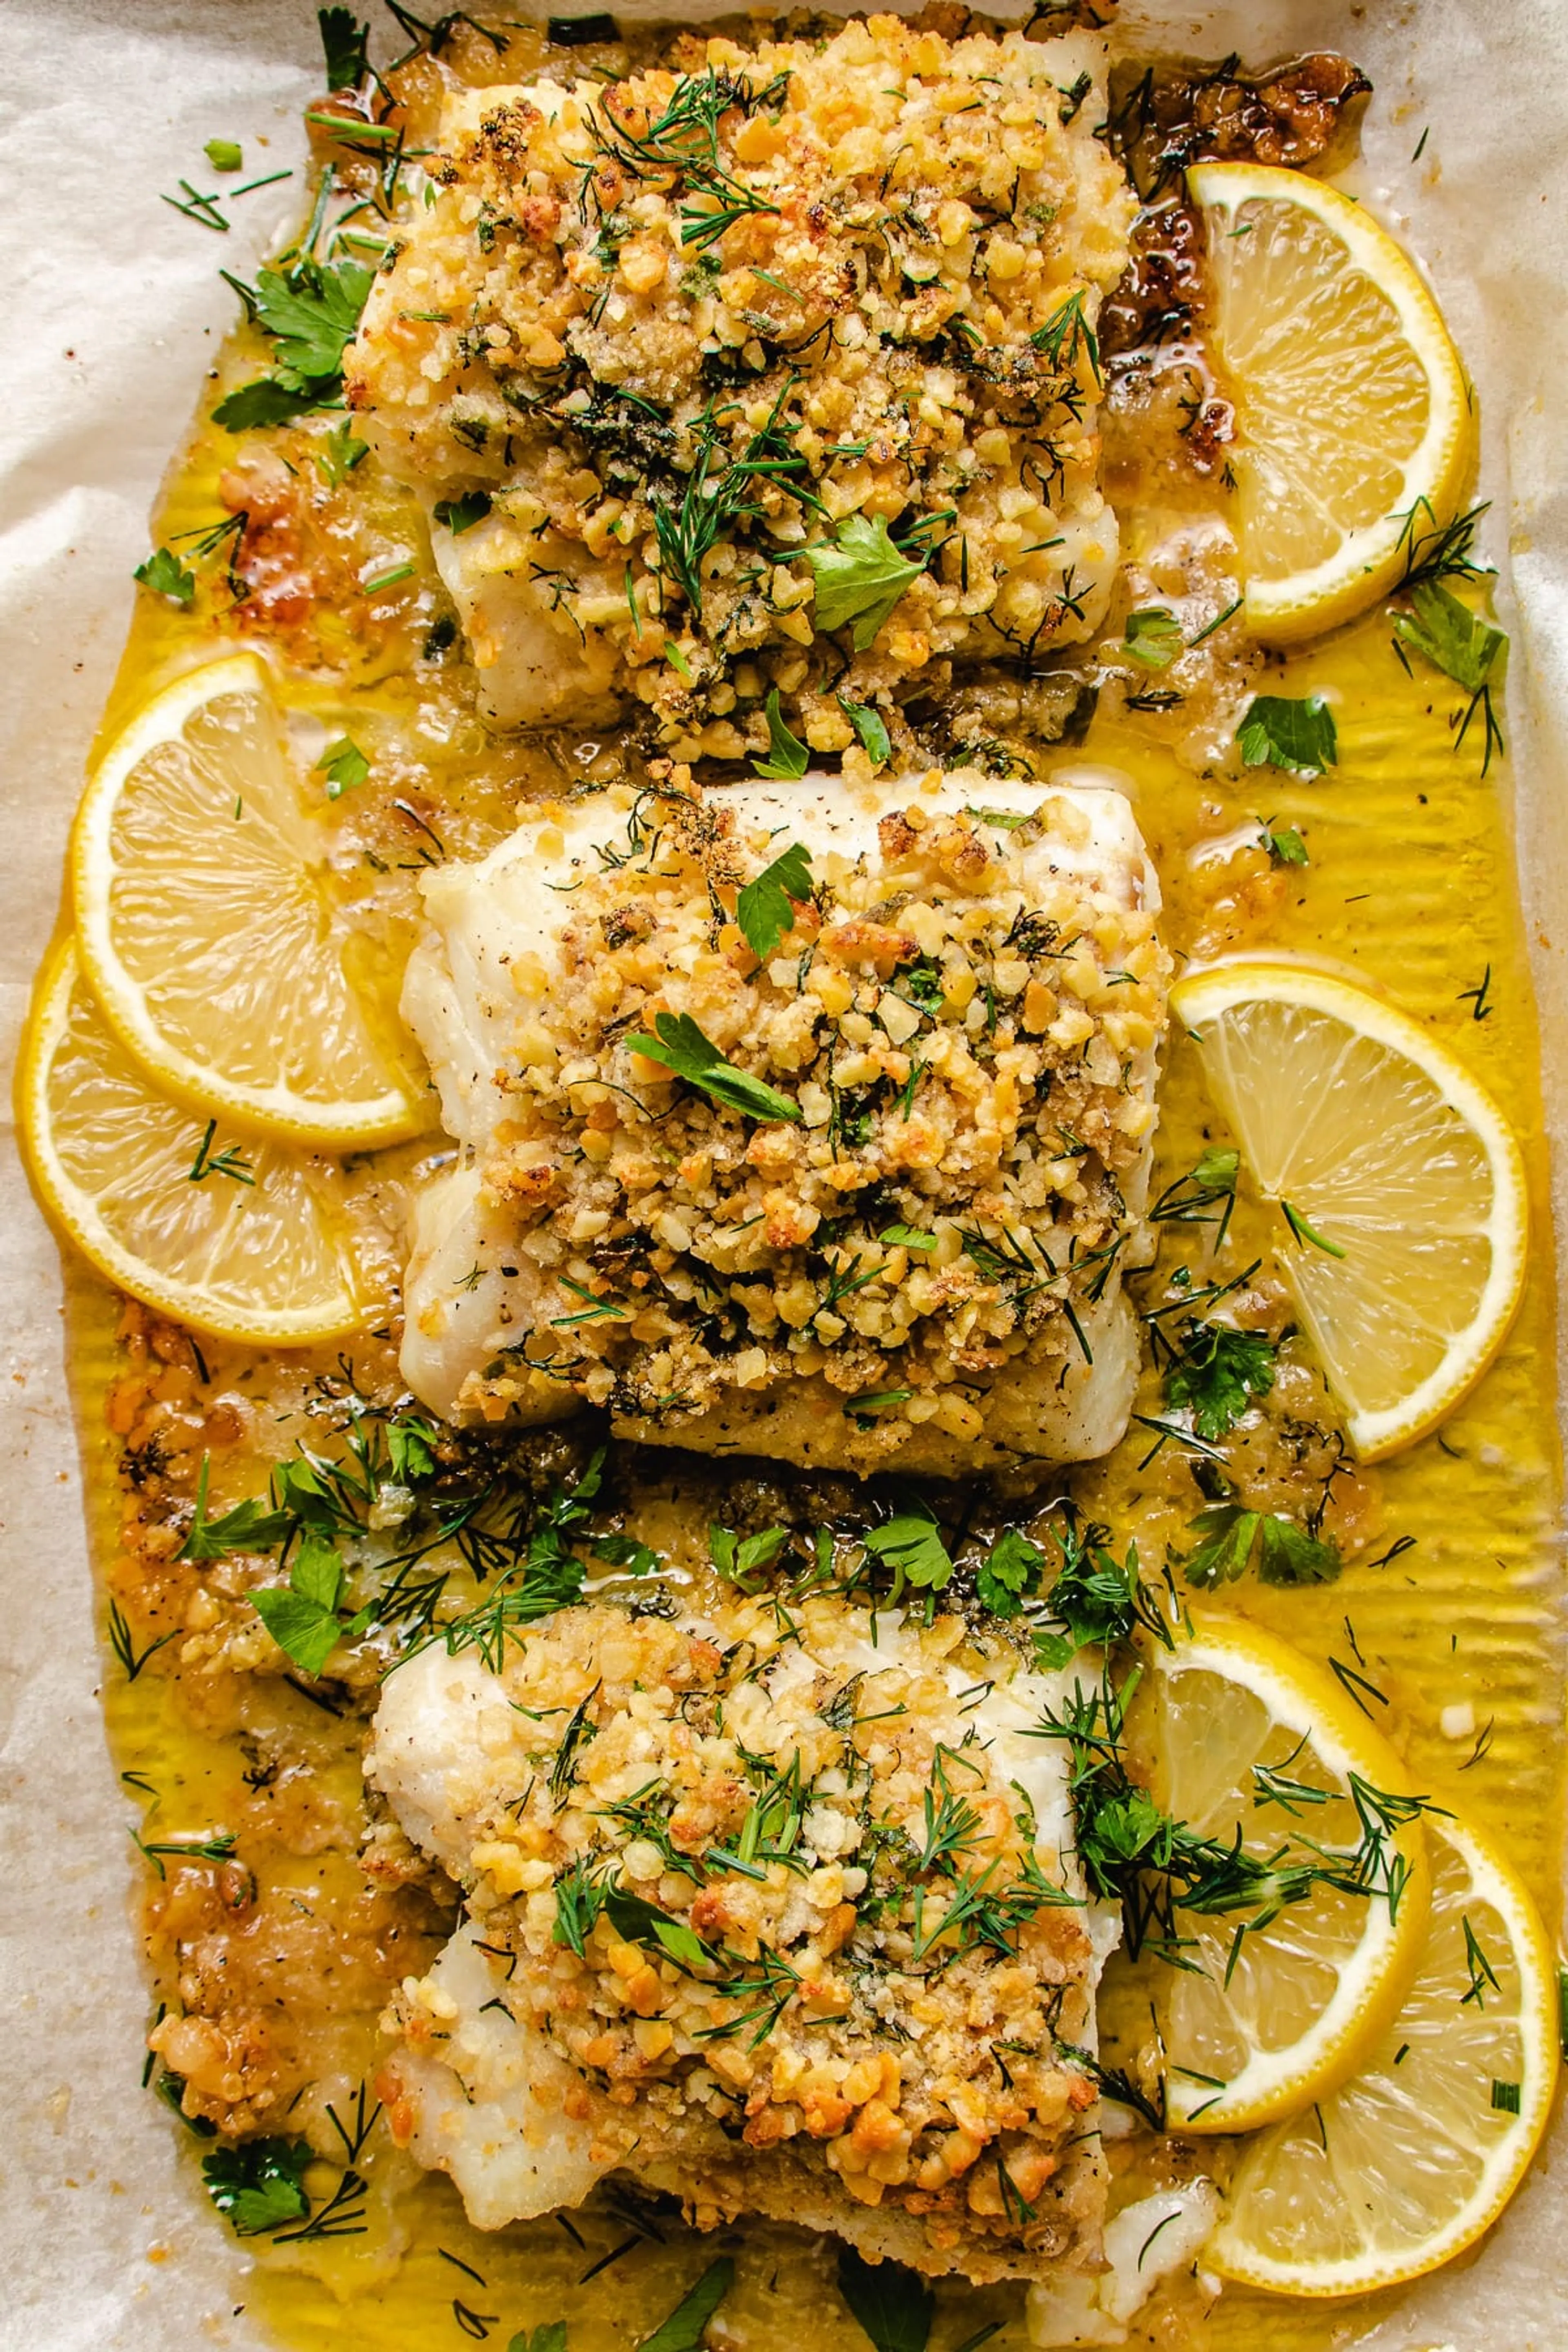 Baked cod with panko recipe